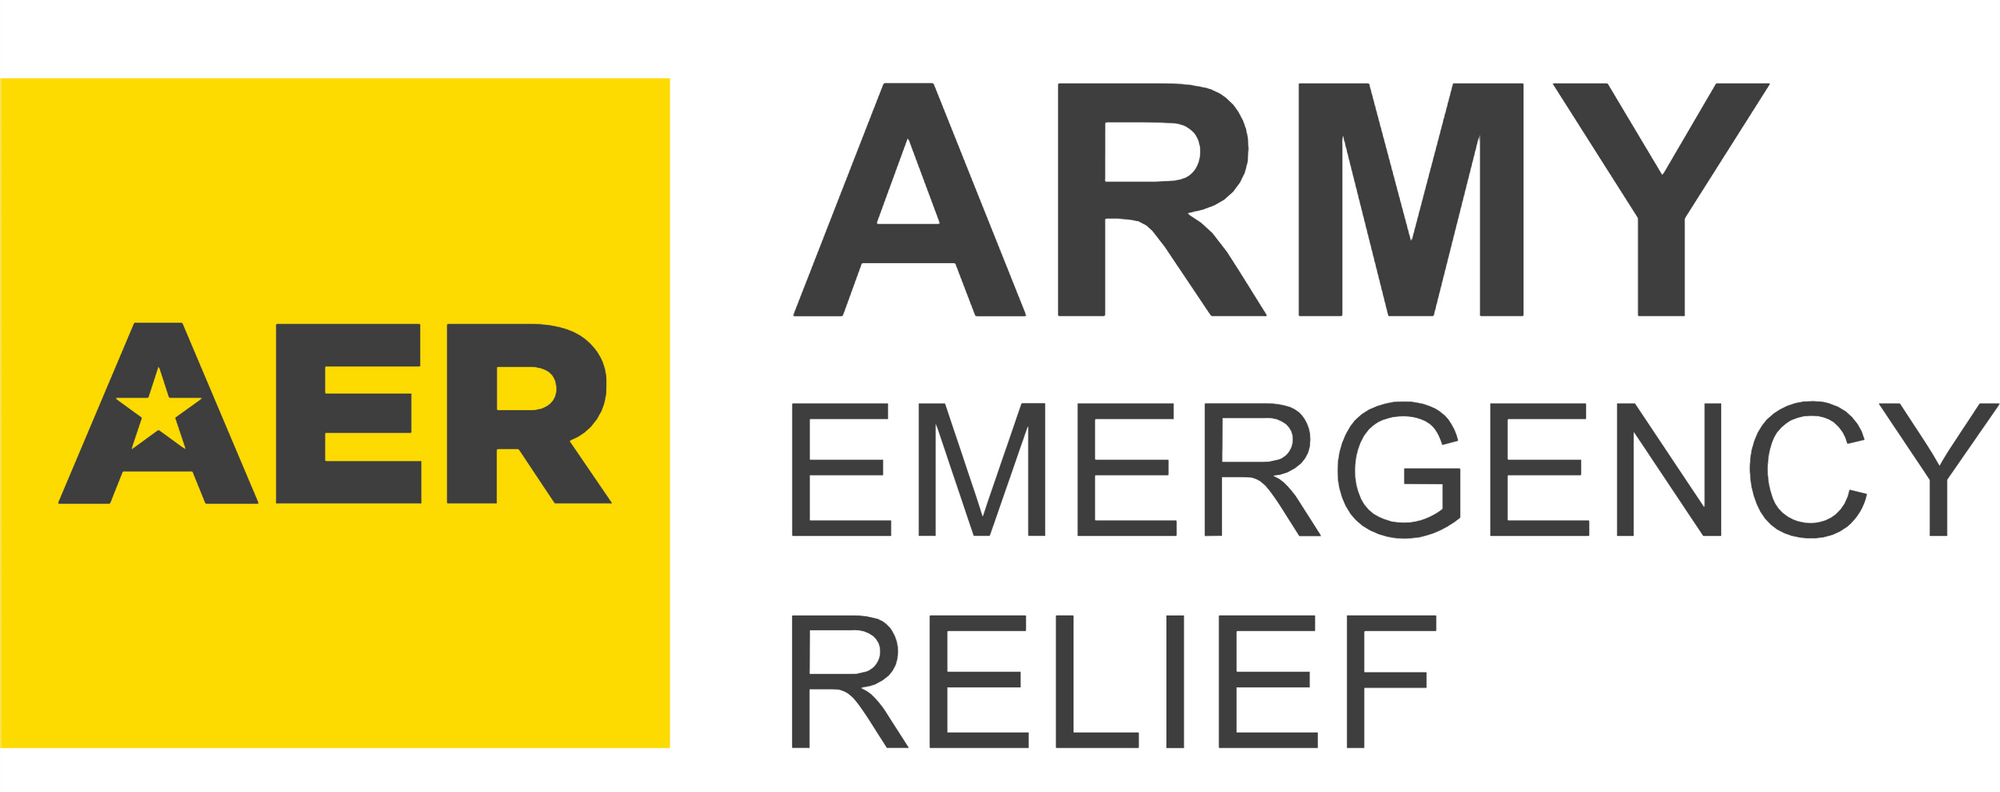 Army Emergency Relief Fund Receives 2nd Donation From Run Fierce Community!💪